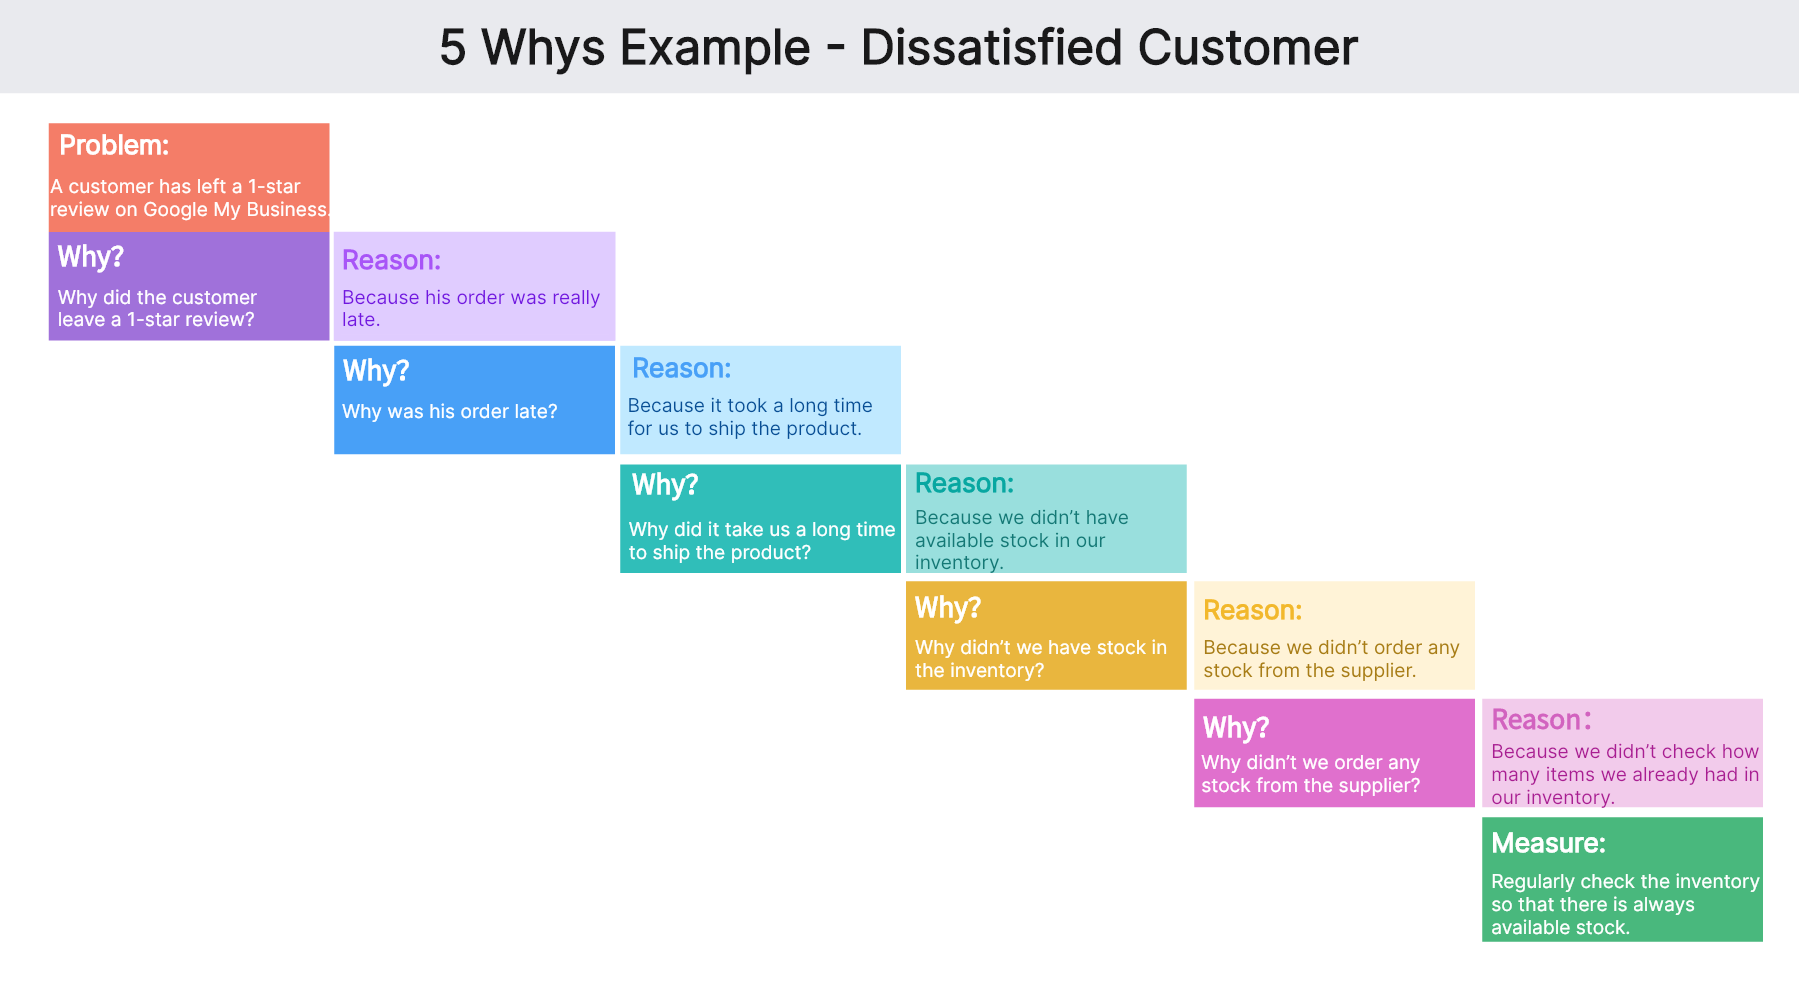 5 whys example dissatisfied customer